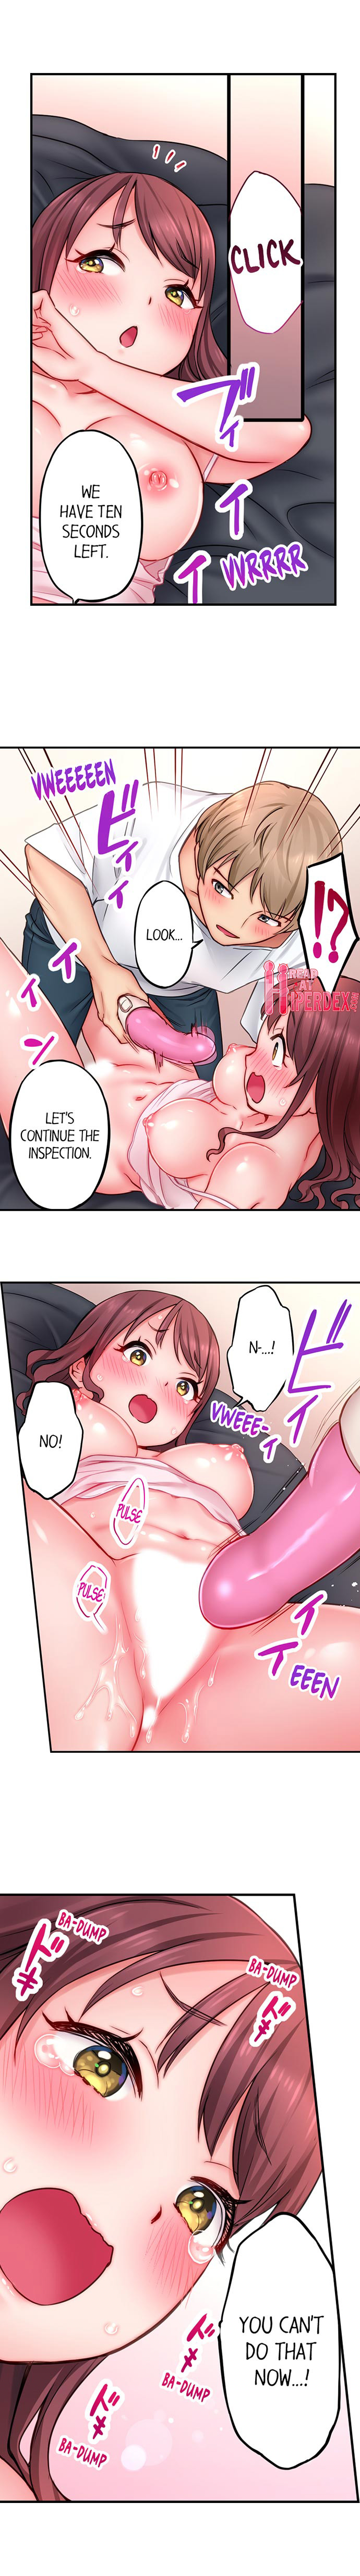 You'll Cum in Less Than a Minute! - Chapter 3 Page 5